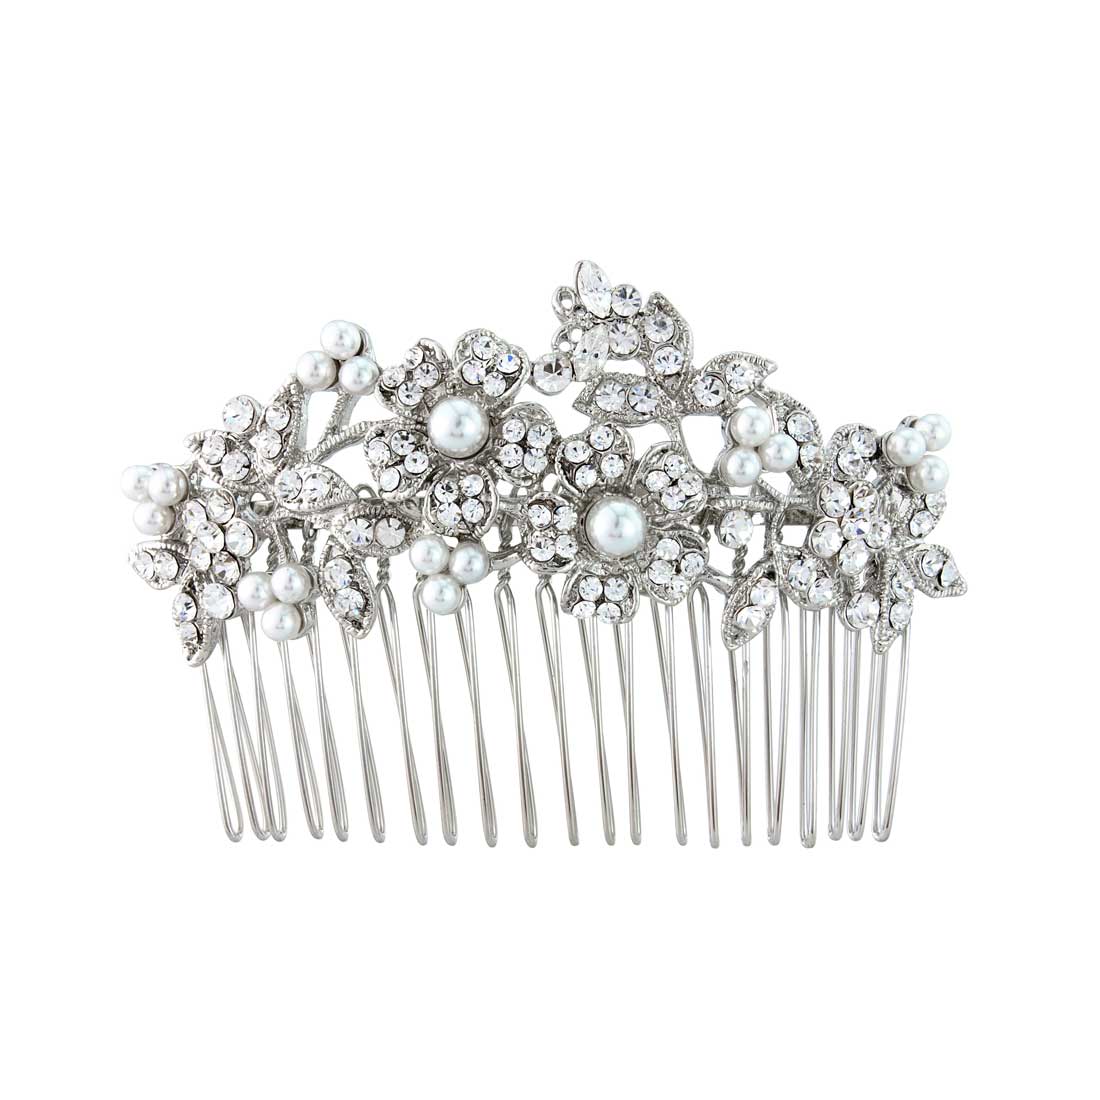 Bouquet of Pearl Crystal & Pearl Silver Floral Bridal Hair Comb